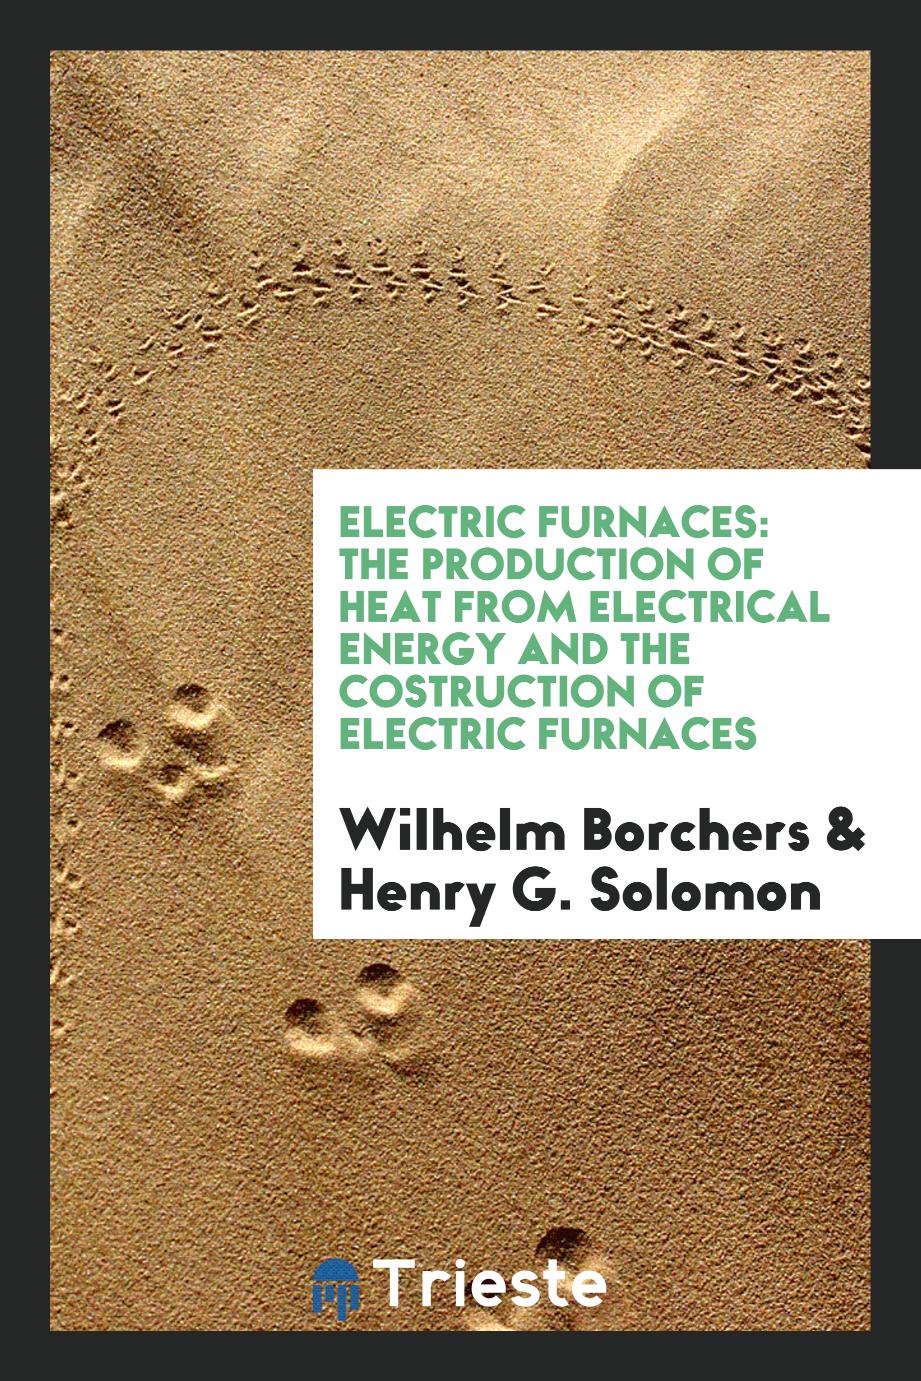 Electric Furnaces: The Production of Heat from Electrical Energy and the Costruction of Electric Furnaces